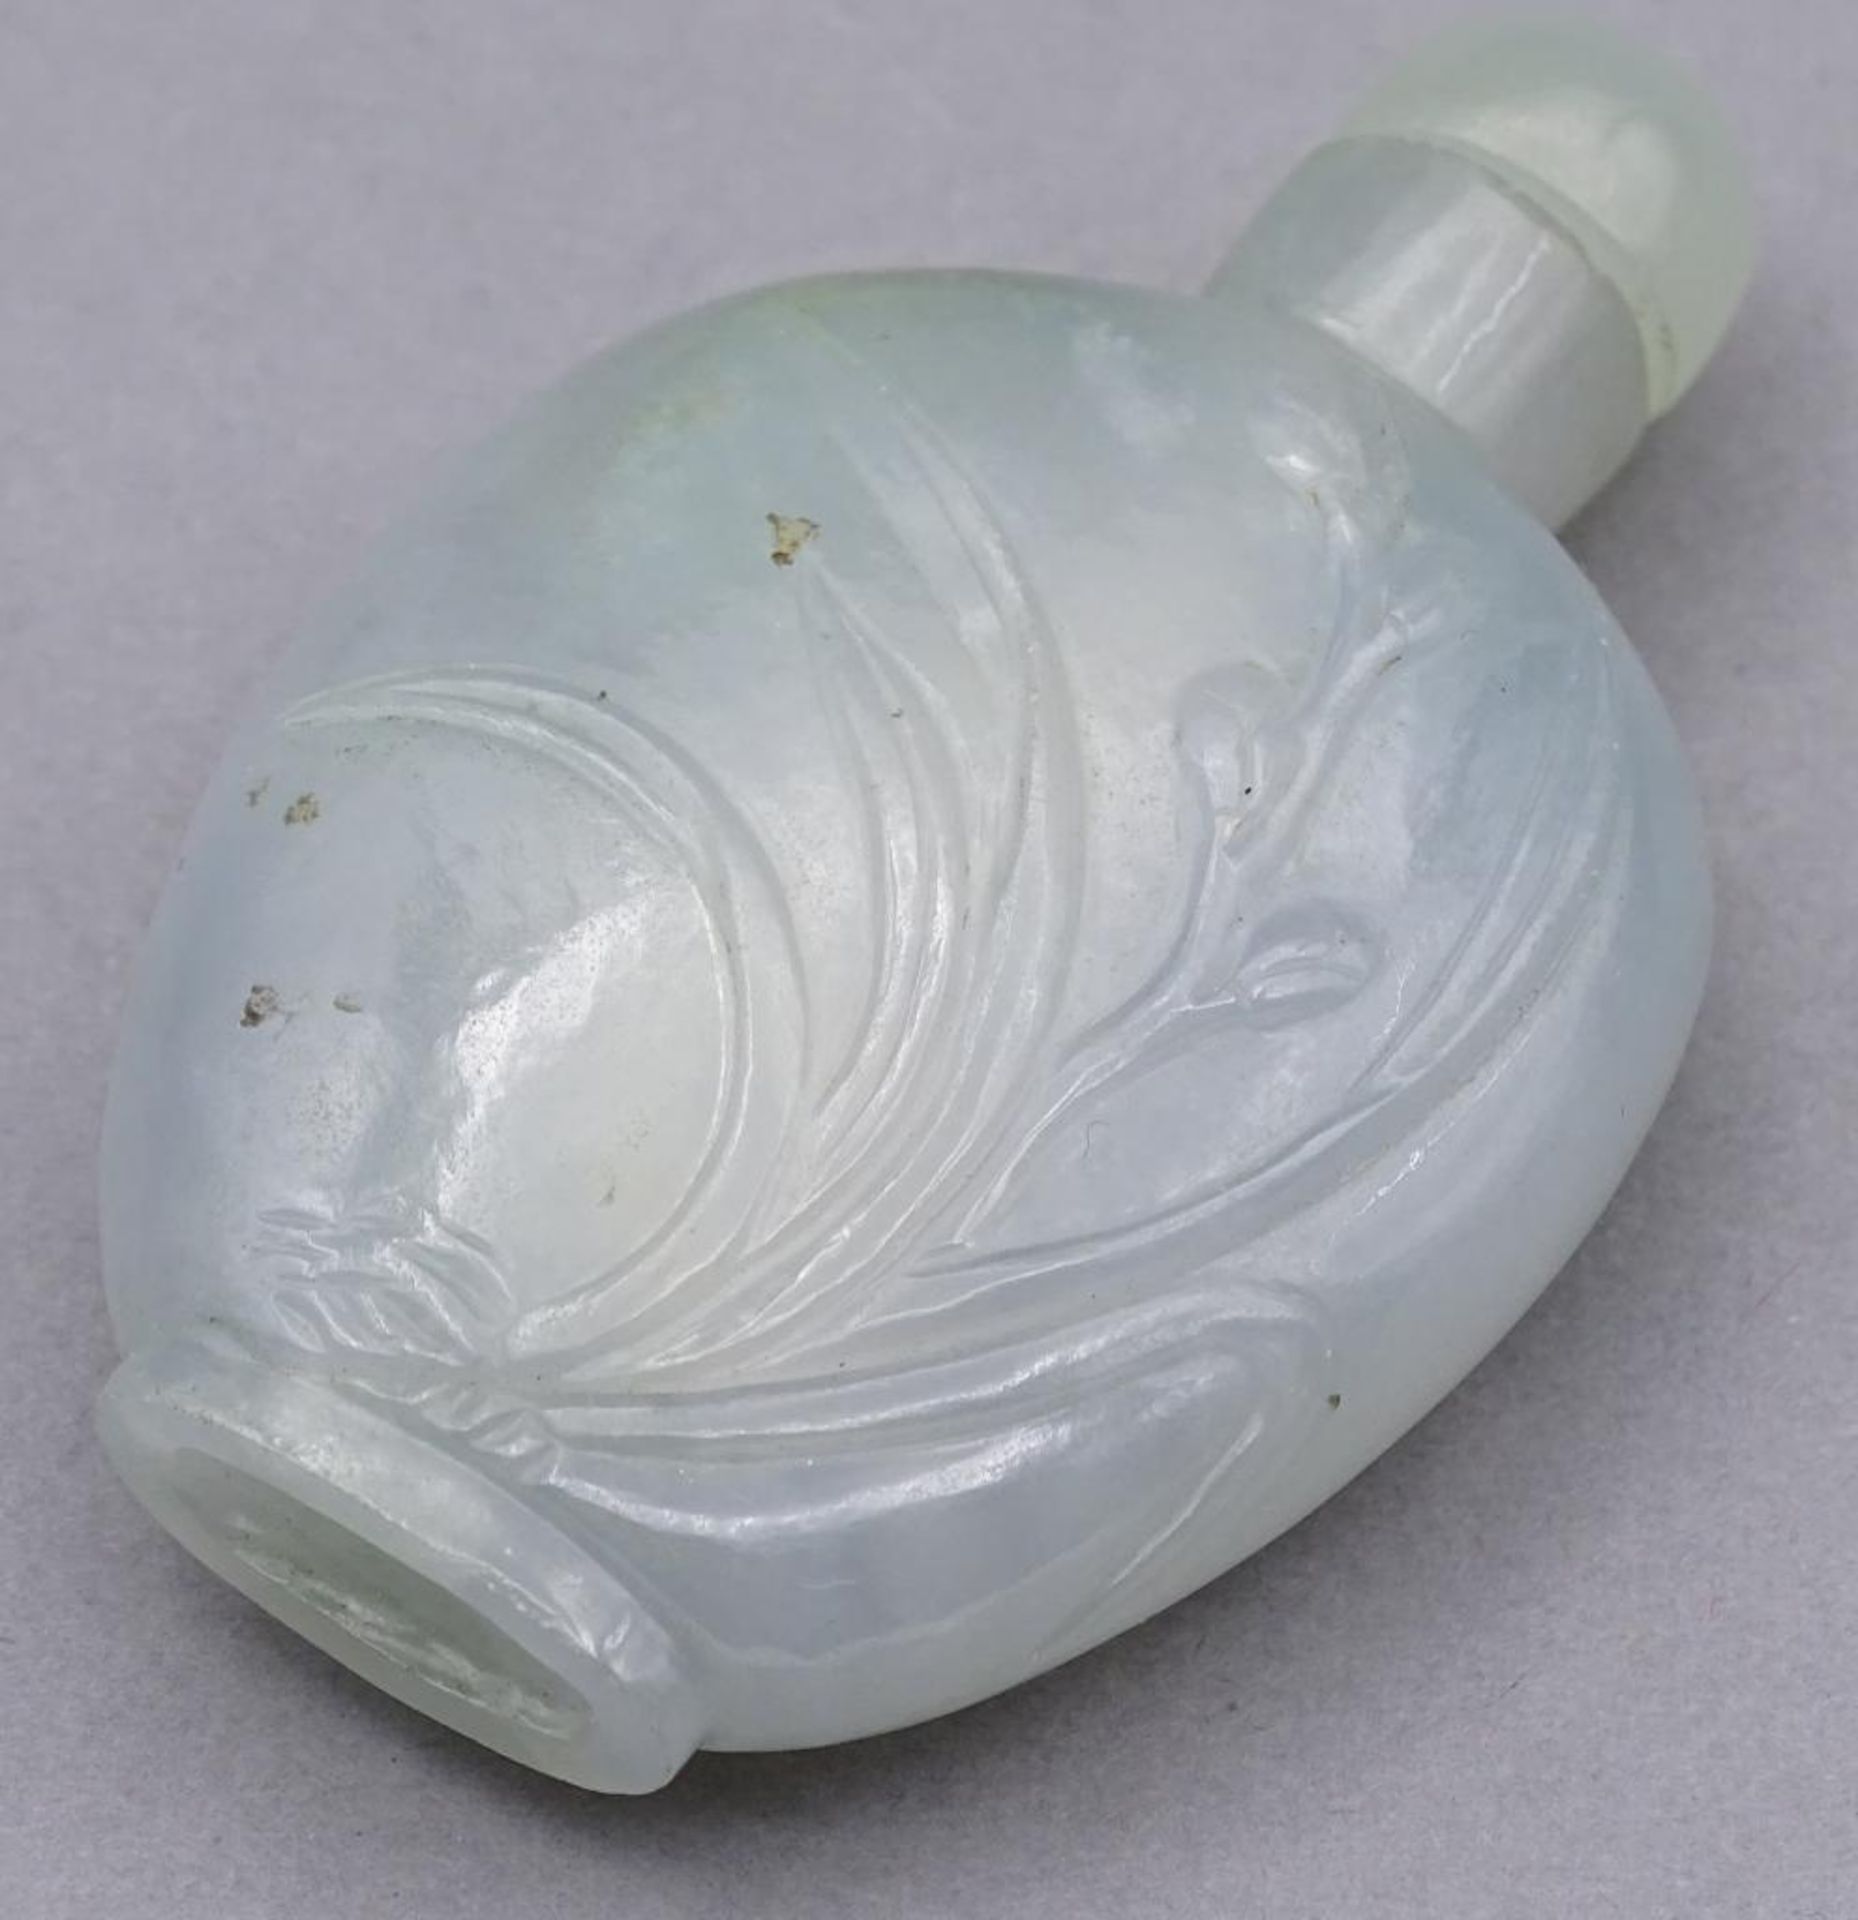 kl. Snuff Bottle,wohl Jade, China, h-6 cm, B-3,5 cm- - -22.61 % buyer's premium on the hammer - Image 7 of 8